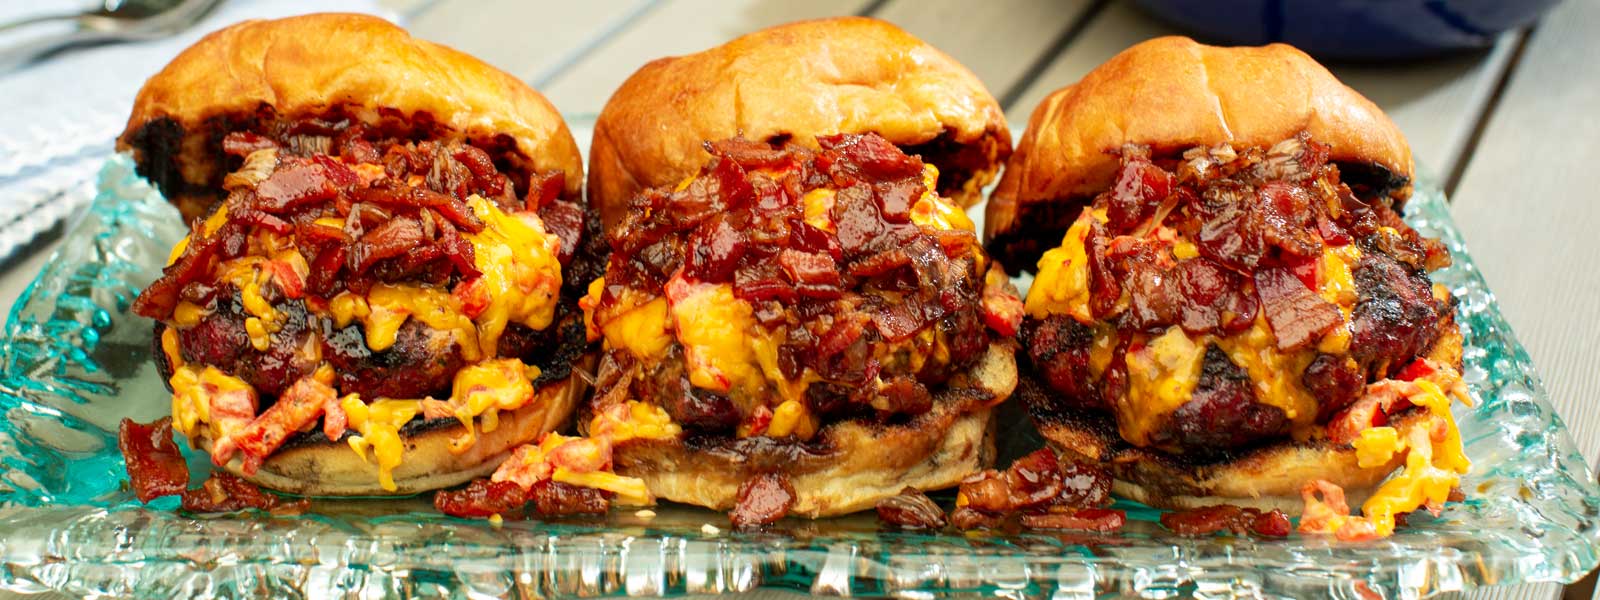 Pimento Cheese Burgers with Bacon Jam